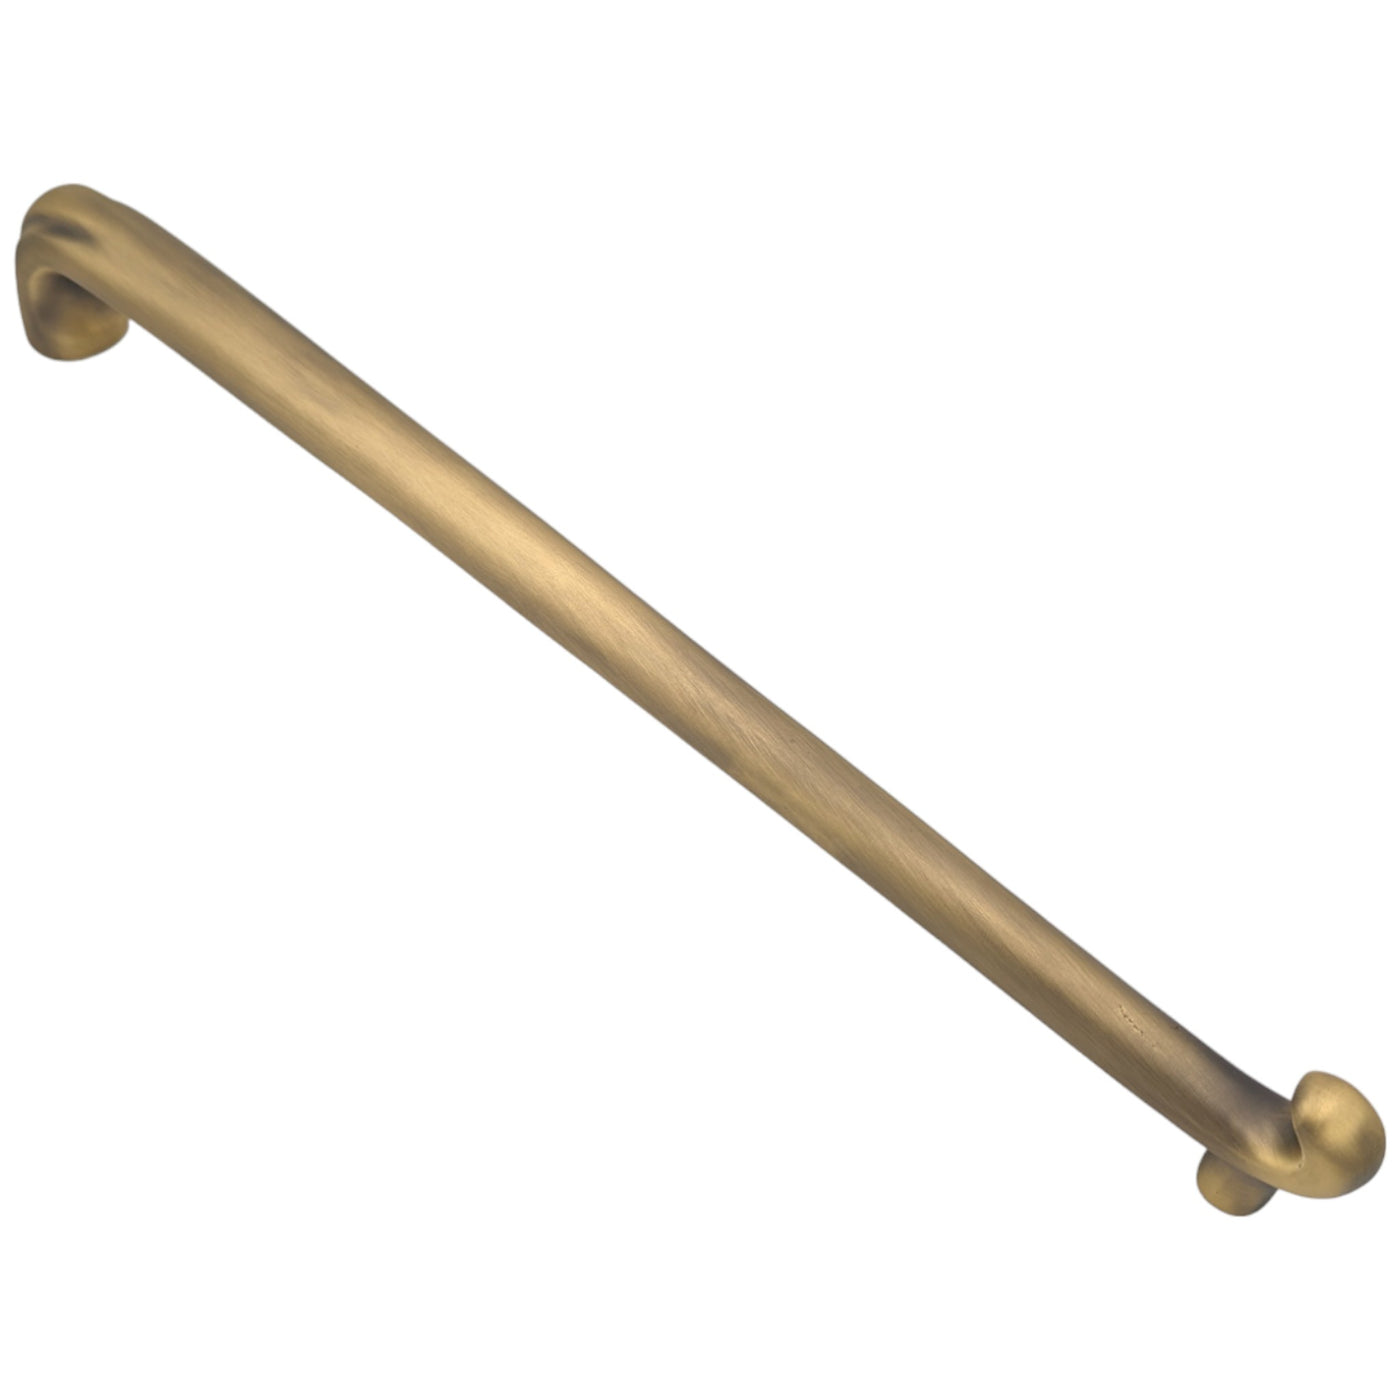 17 1/2 inch (16 inch c-c) Thornton Oversize Pull (Several Finishes Available)